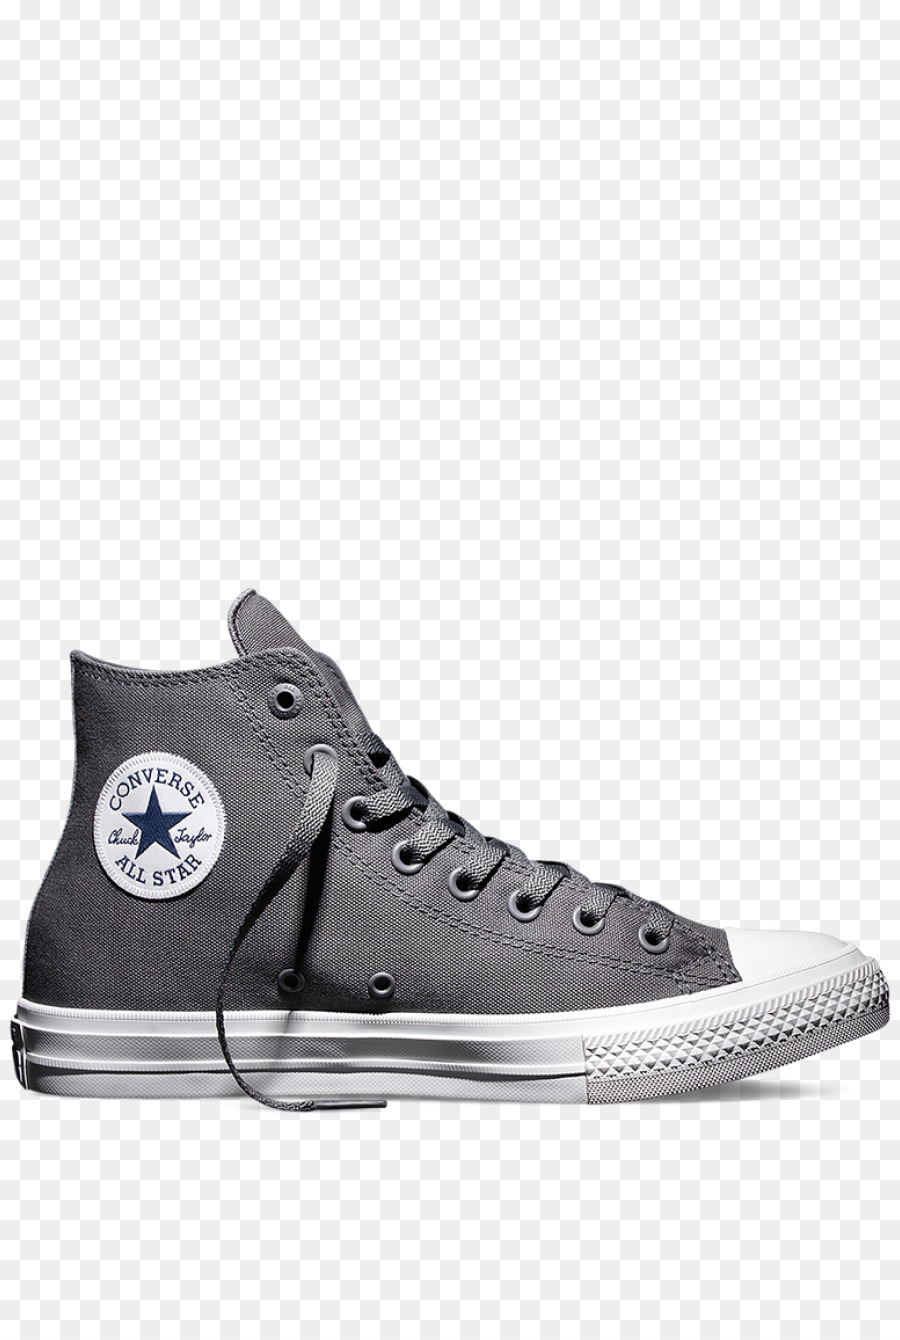 Chuck Taylor All Stars Converse High top Sneakers, Slip on Schuh - Nike